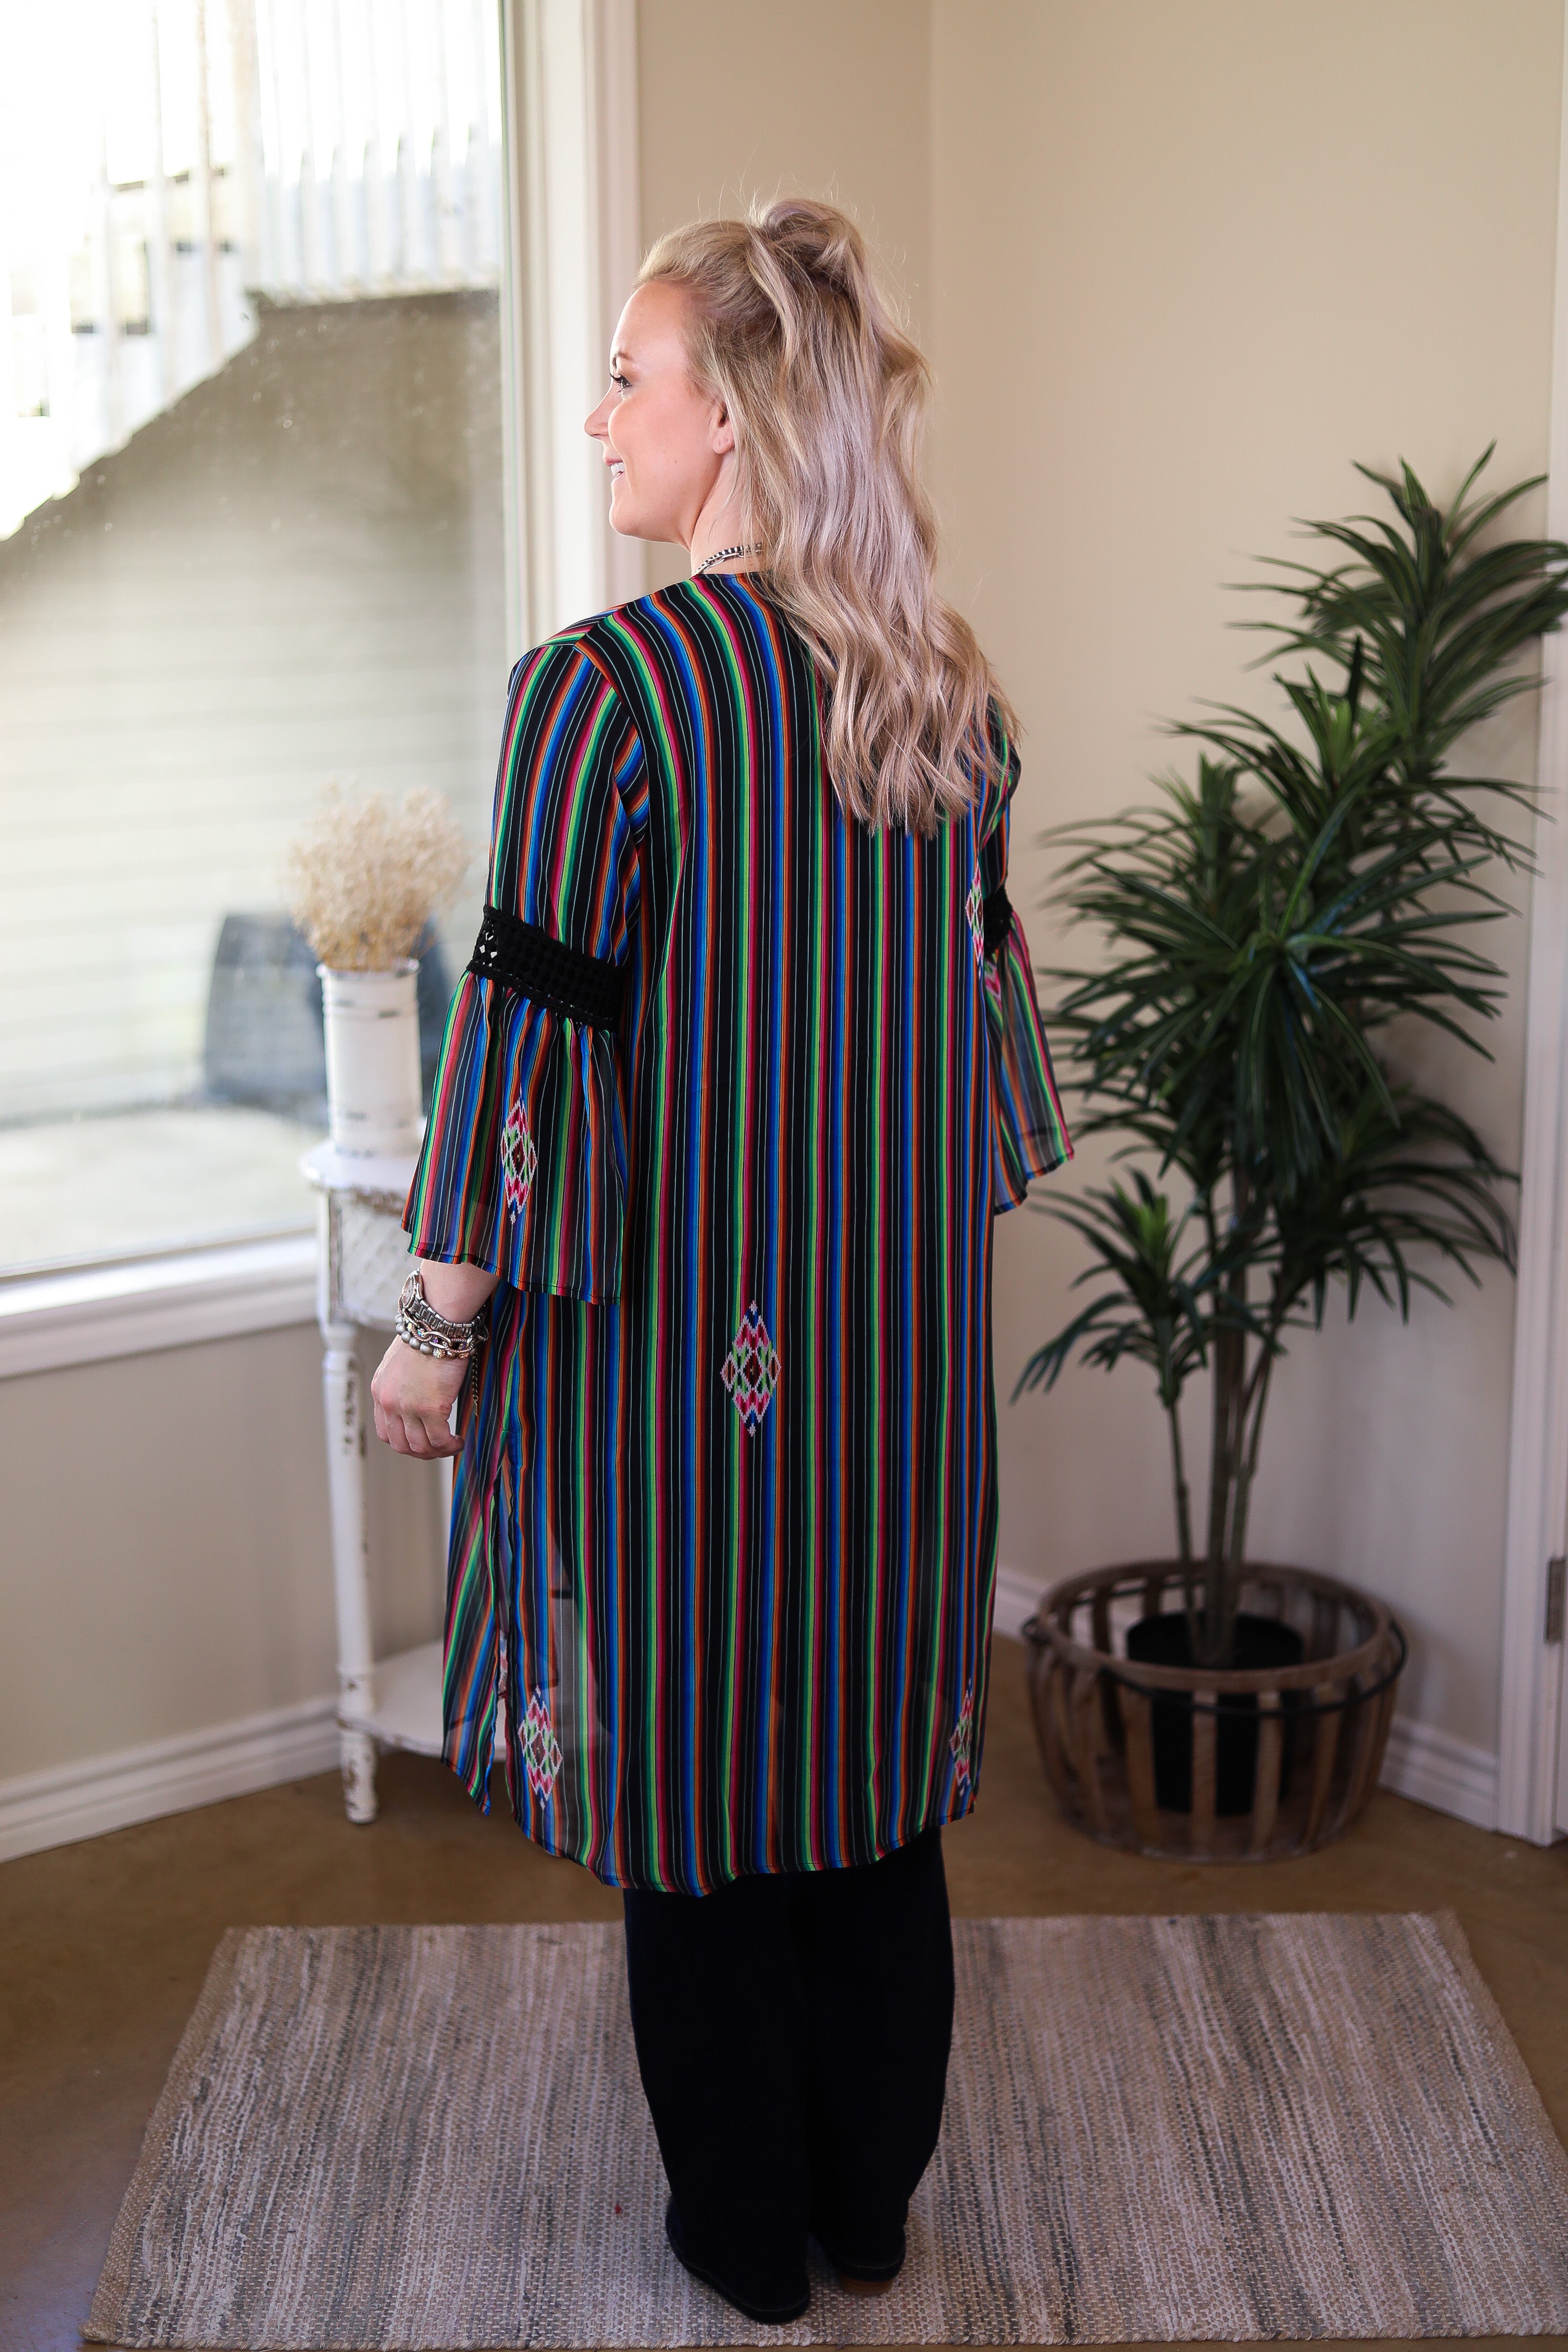 Last Chance Size S/M | Command Attention Striped Kimono with Crochet Detailing in Black - Giddy Up Glamour Boutique